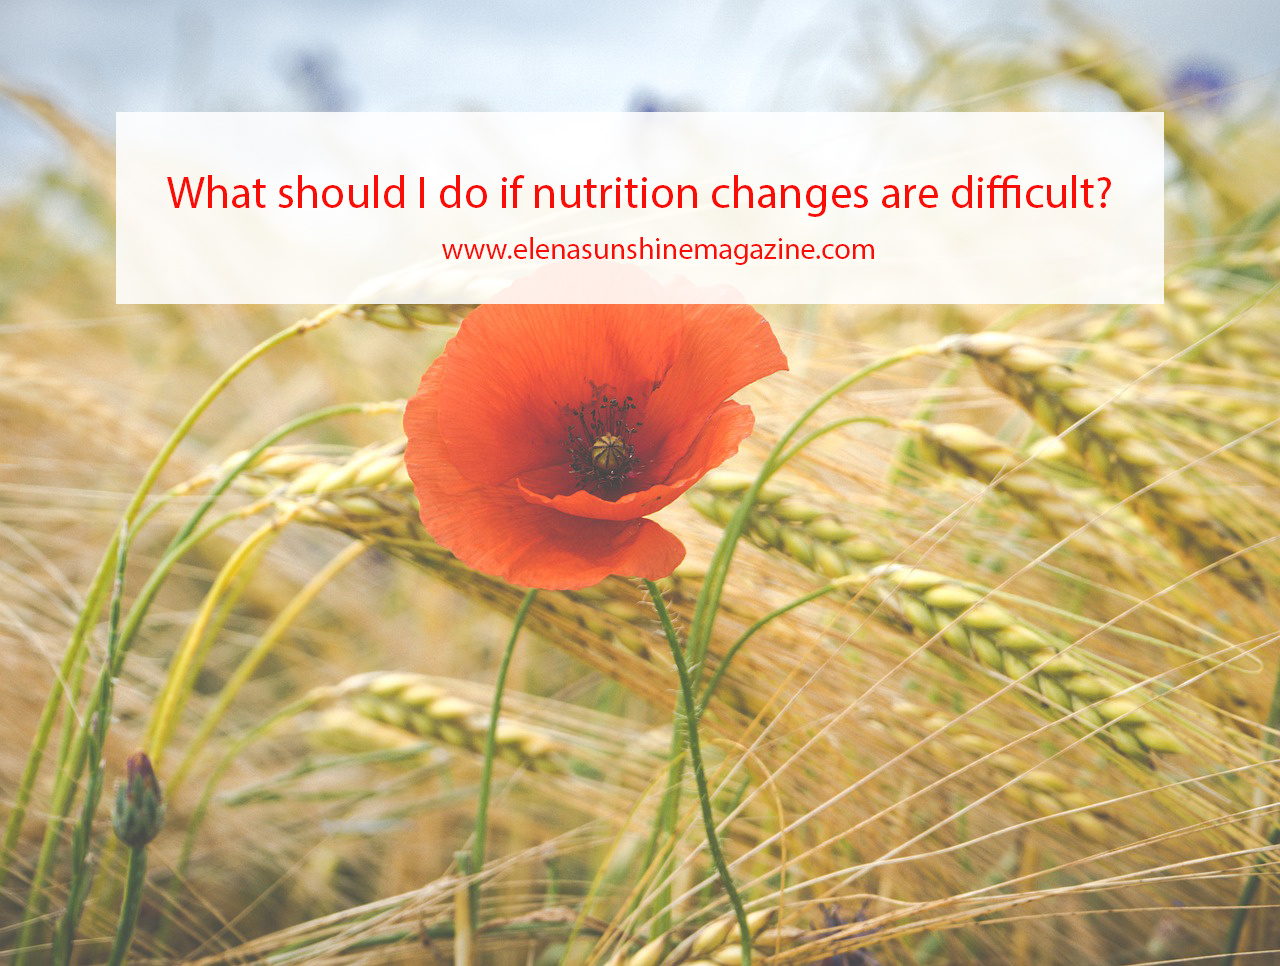 What should I do if nutrition changes are difficult?